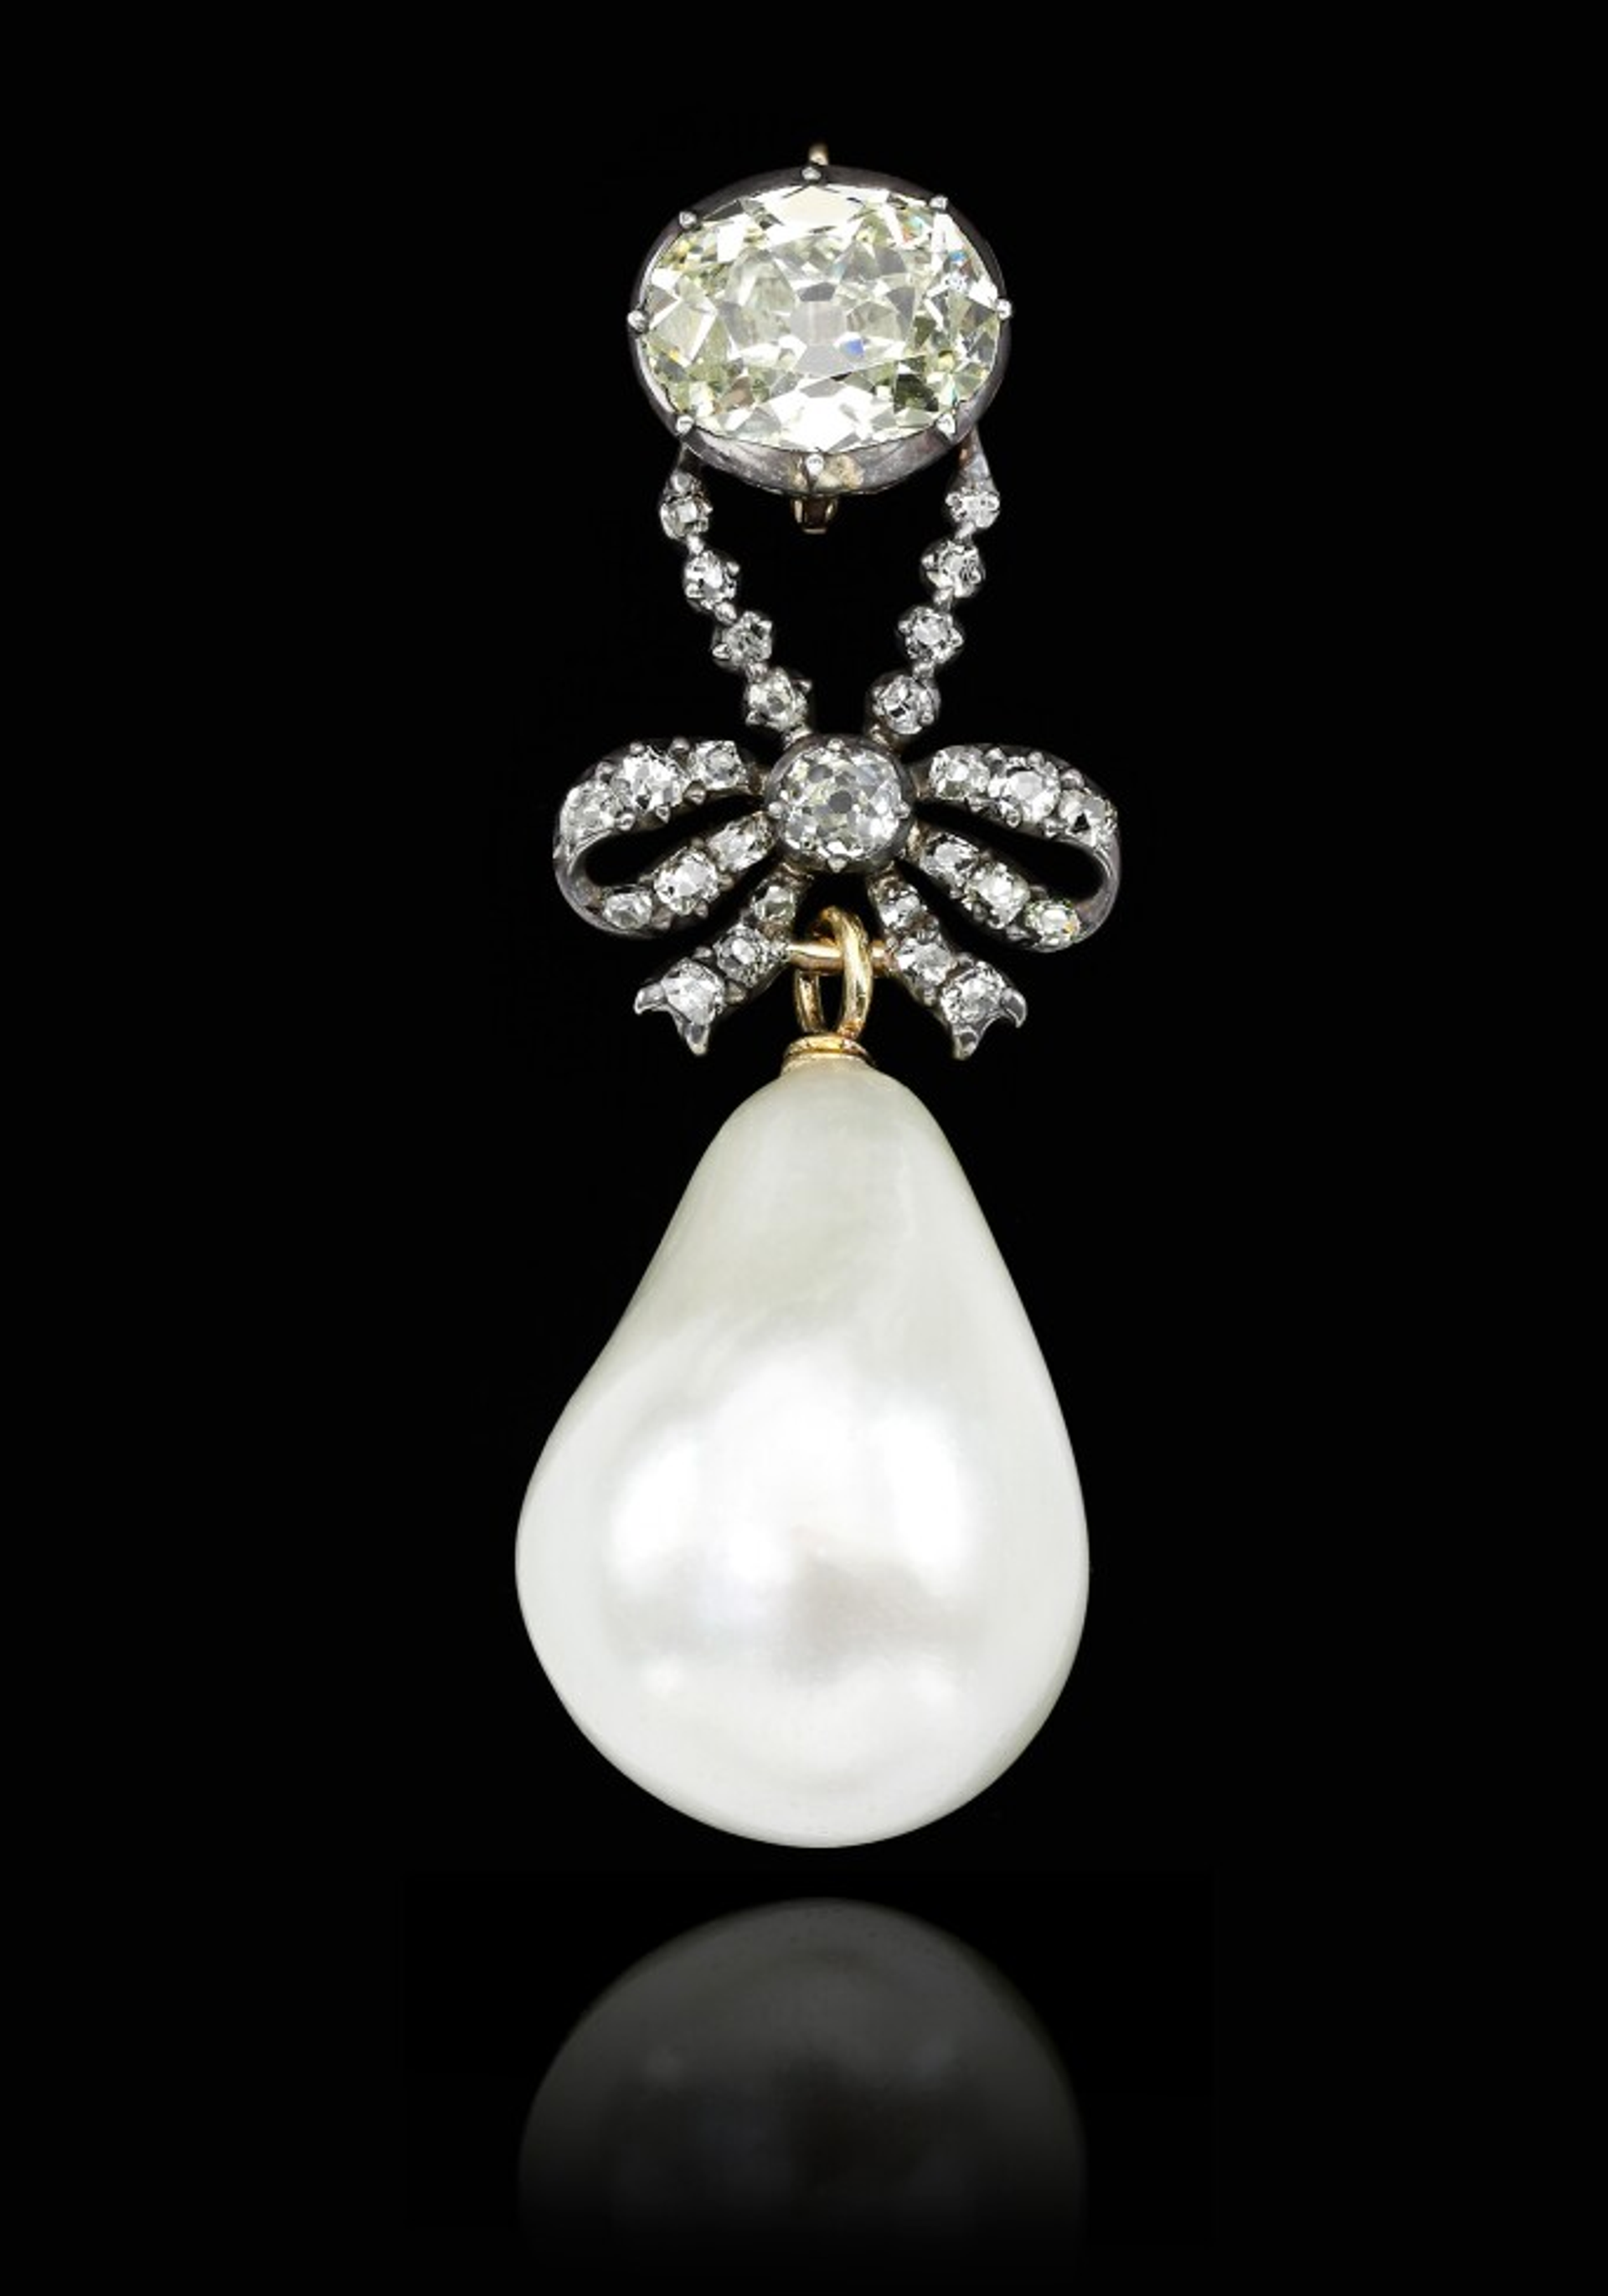 An image of a jewel worn by Queen Marie Antoinette: a large diamond bow hanging from a large diamond solitaire. A big pale pearl hangs from underneath the bow.